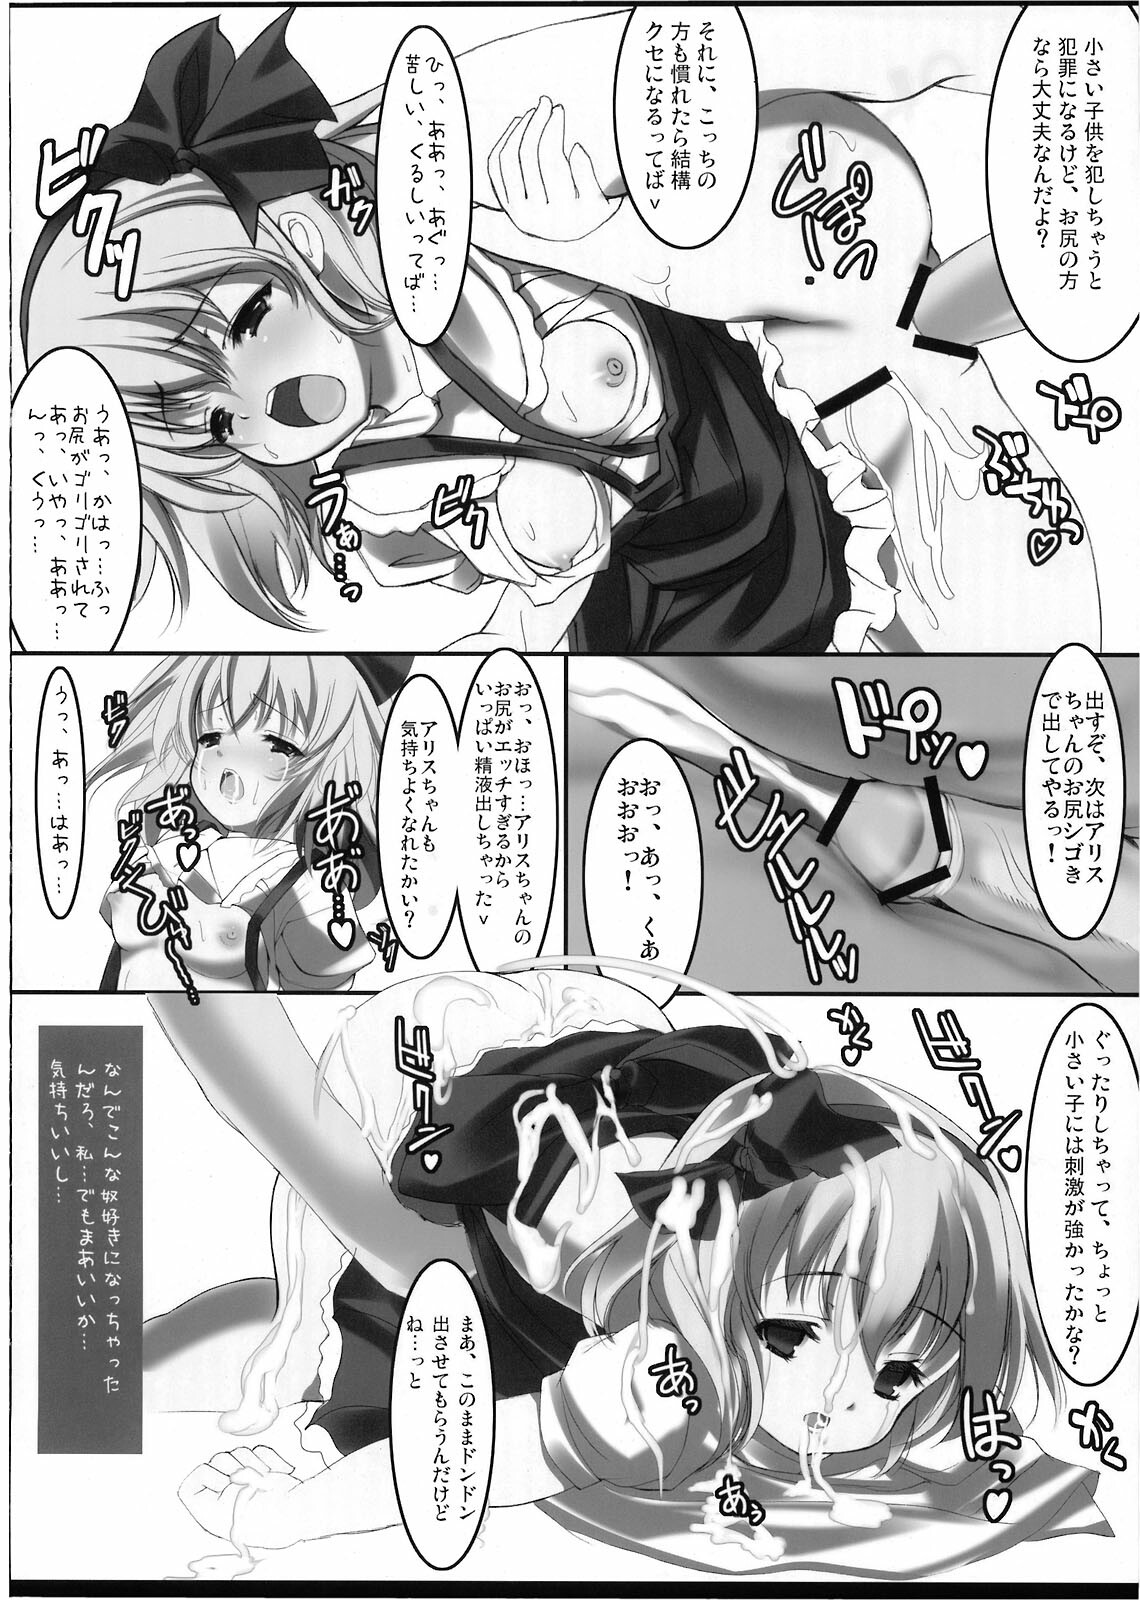 [EARNESTLY JET CITY] 幻想郷 爆!! (Touhou) page 26 full